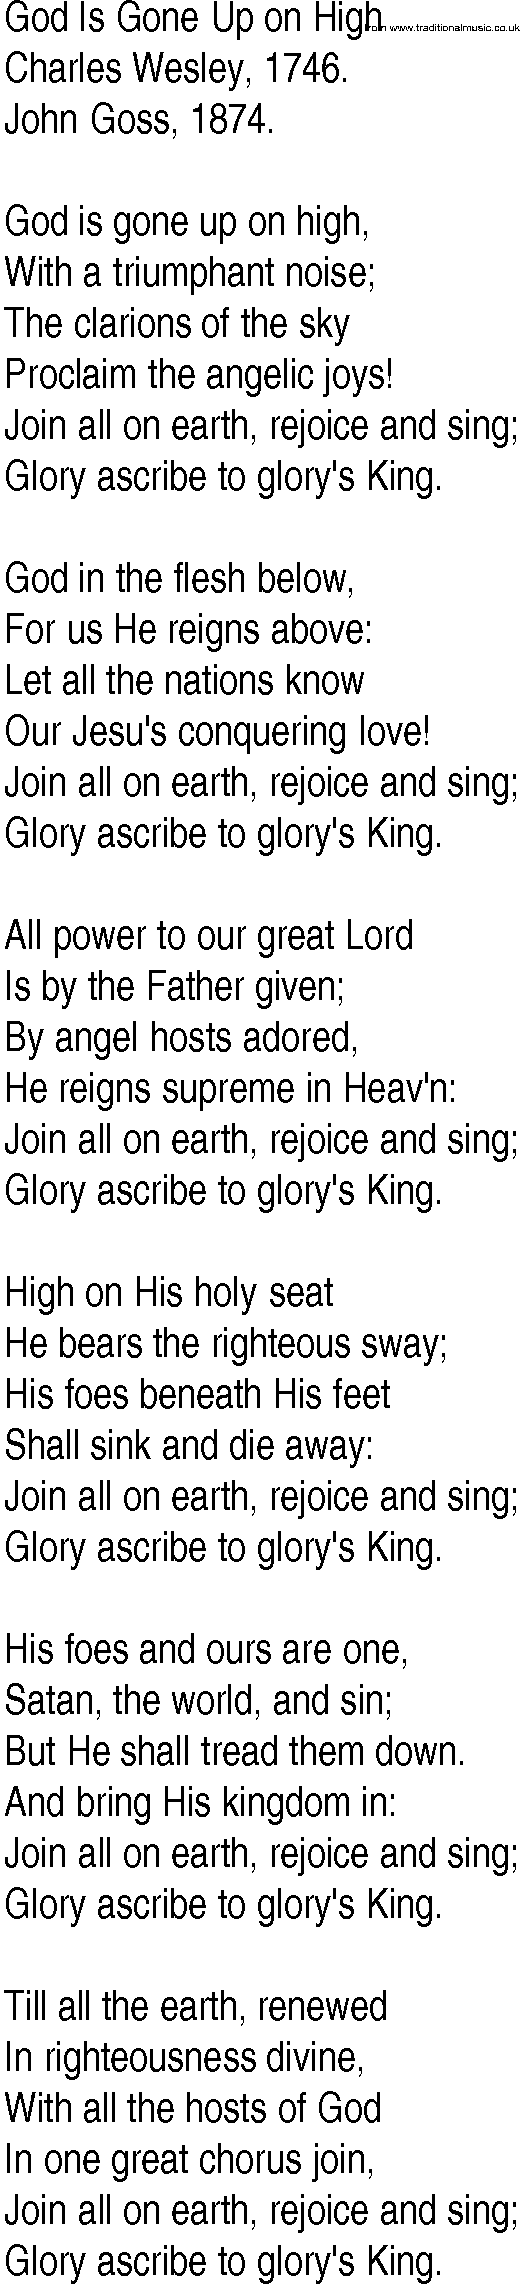 Hymn and Gospel Song: God Is Gone Up on High by Charles Wesley lyrics